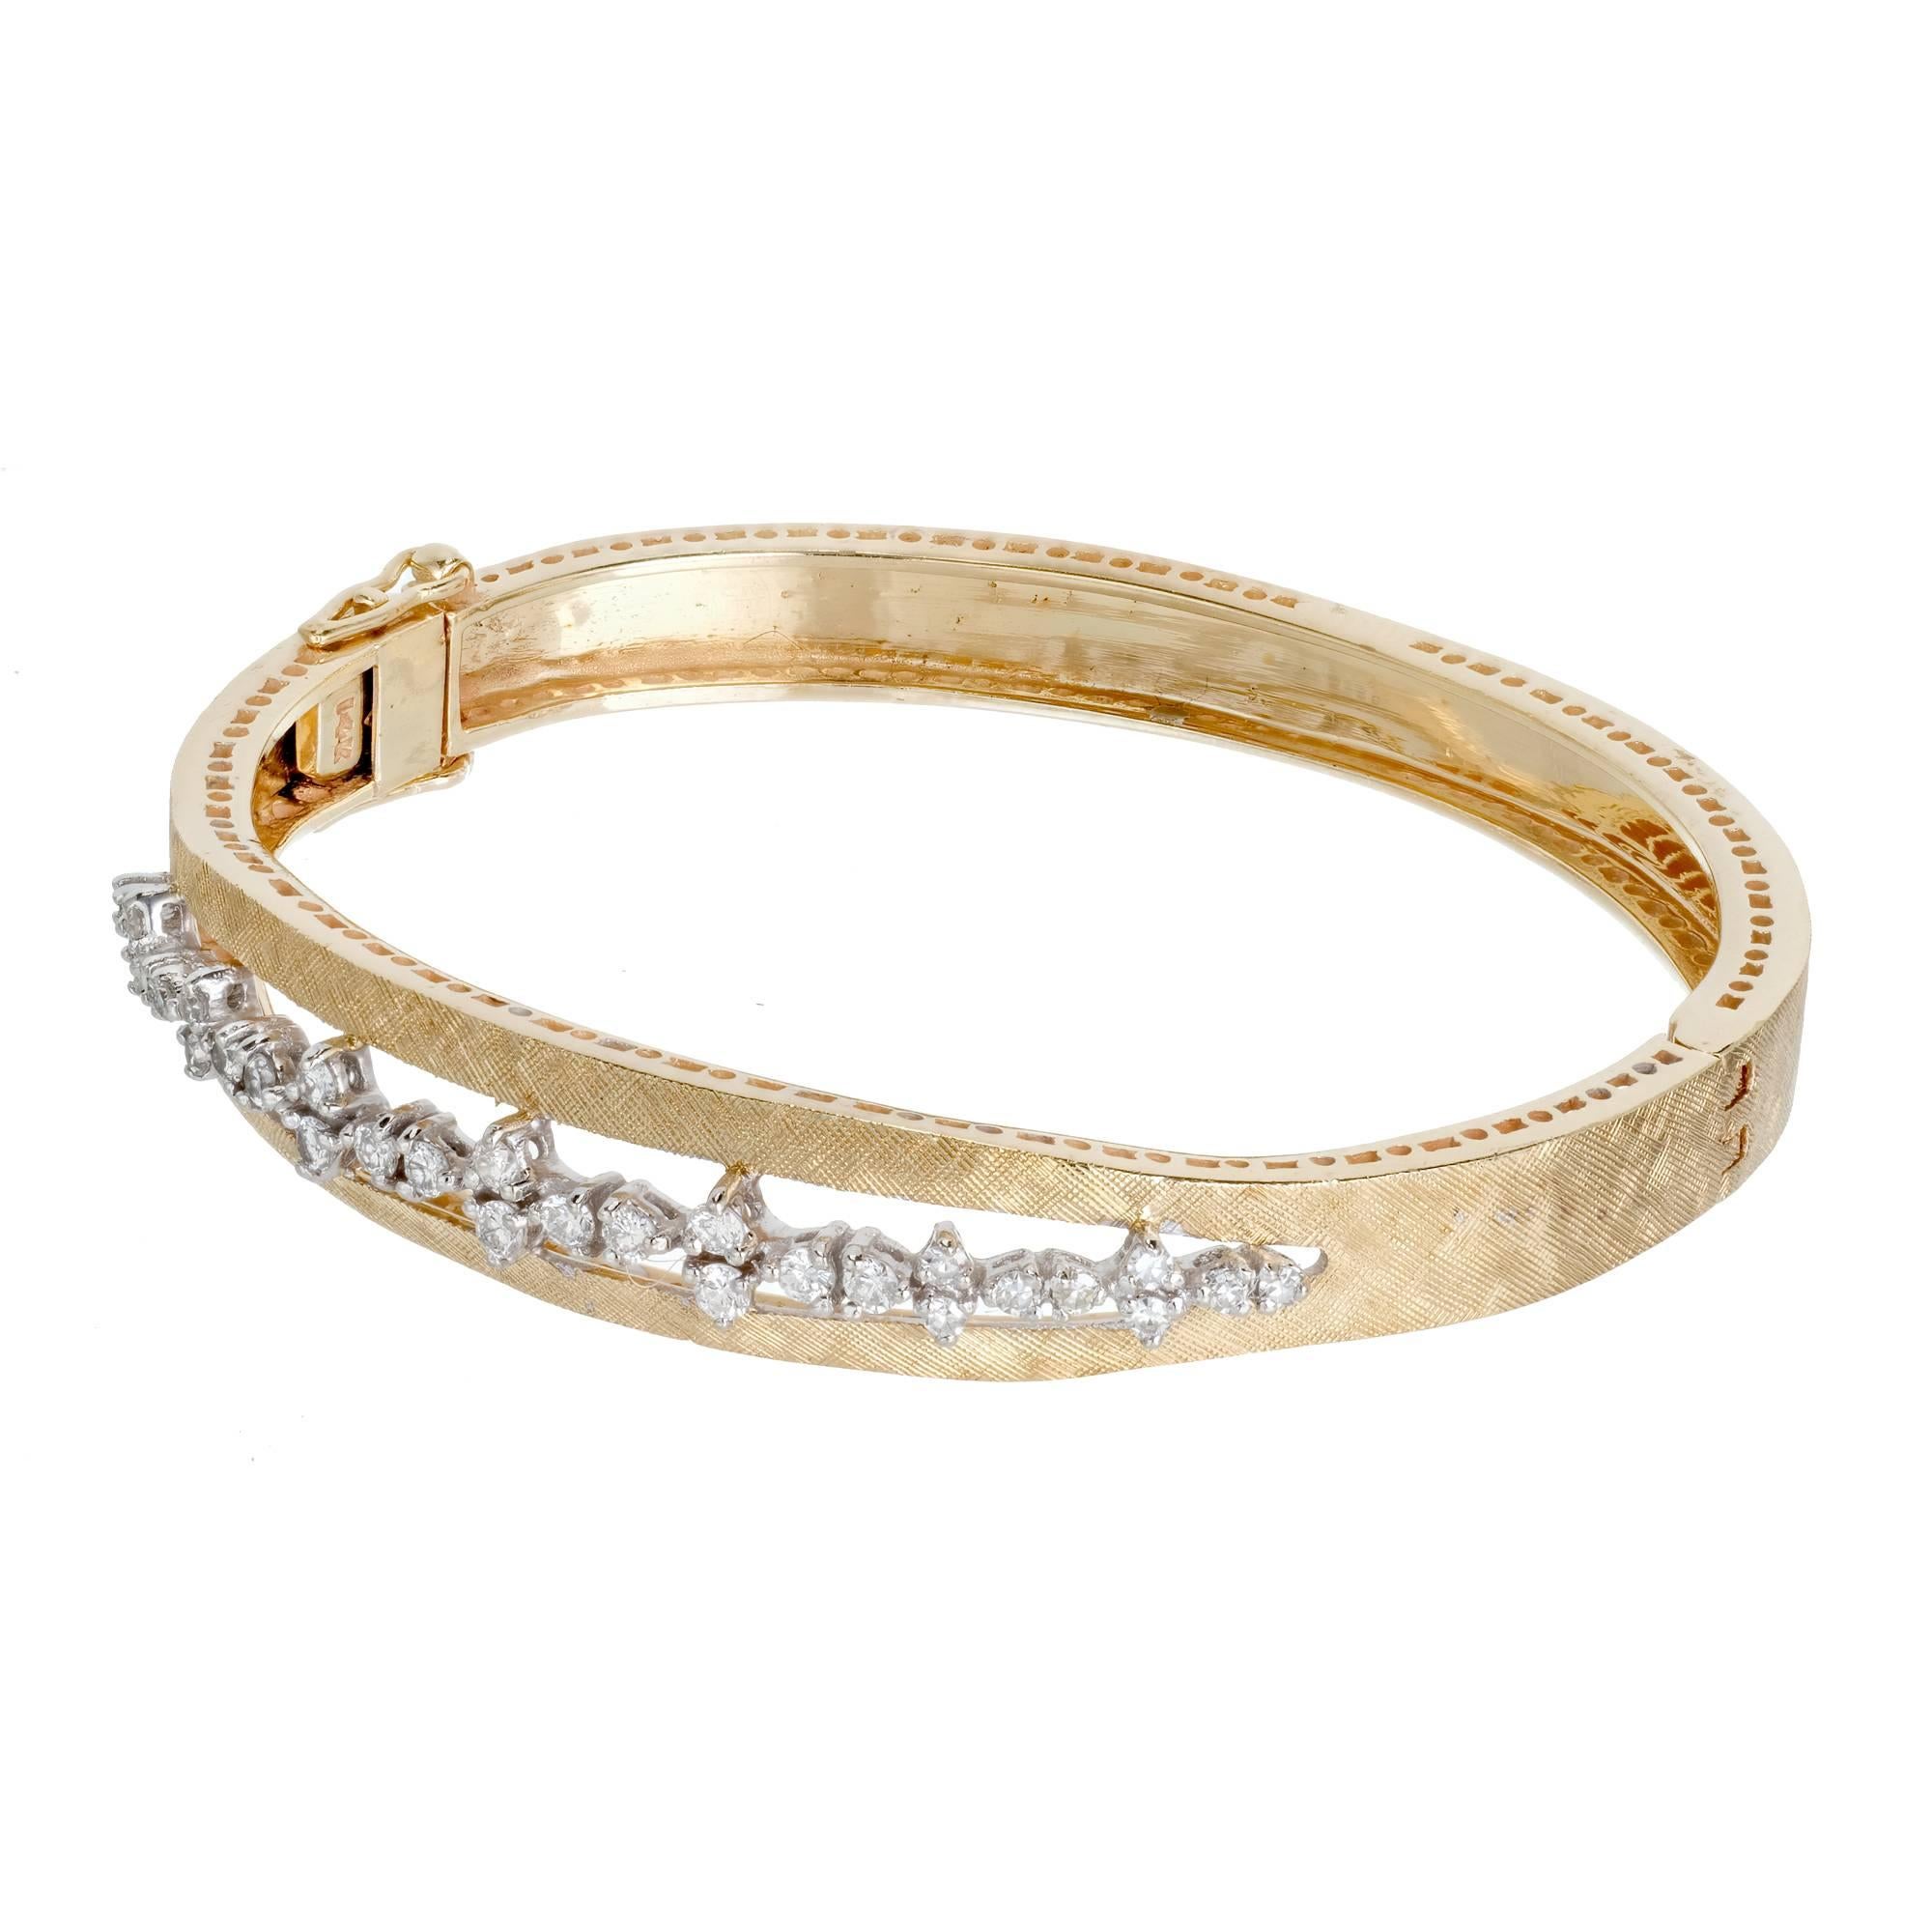 1960's Diamond bangle bracelet. This exquisite 14k yellow gold bangle bracelet features 30 round diamonds set in a 14k white gold center bridge, totaling .98 in carats. The mesmerizing Mid-Century design showcases intricate and meticulous hand